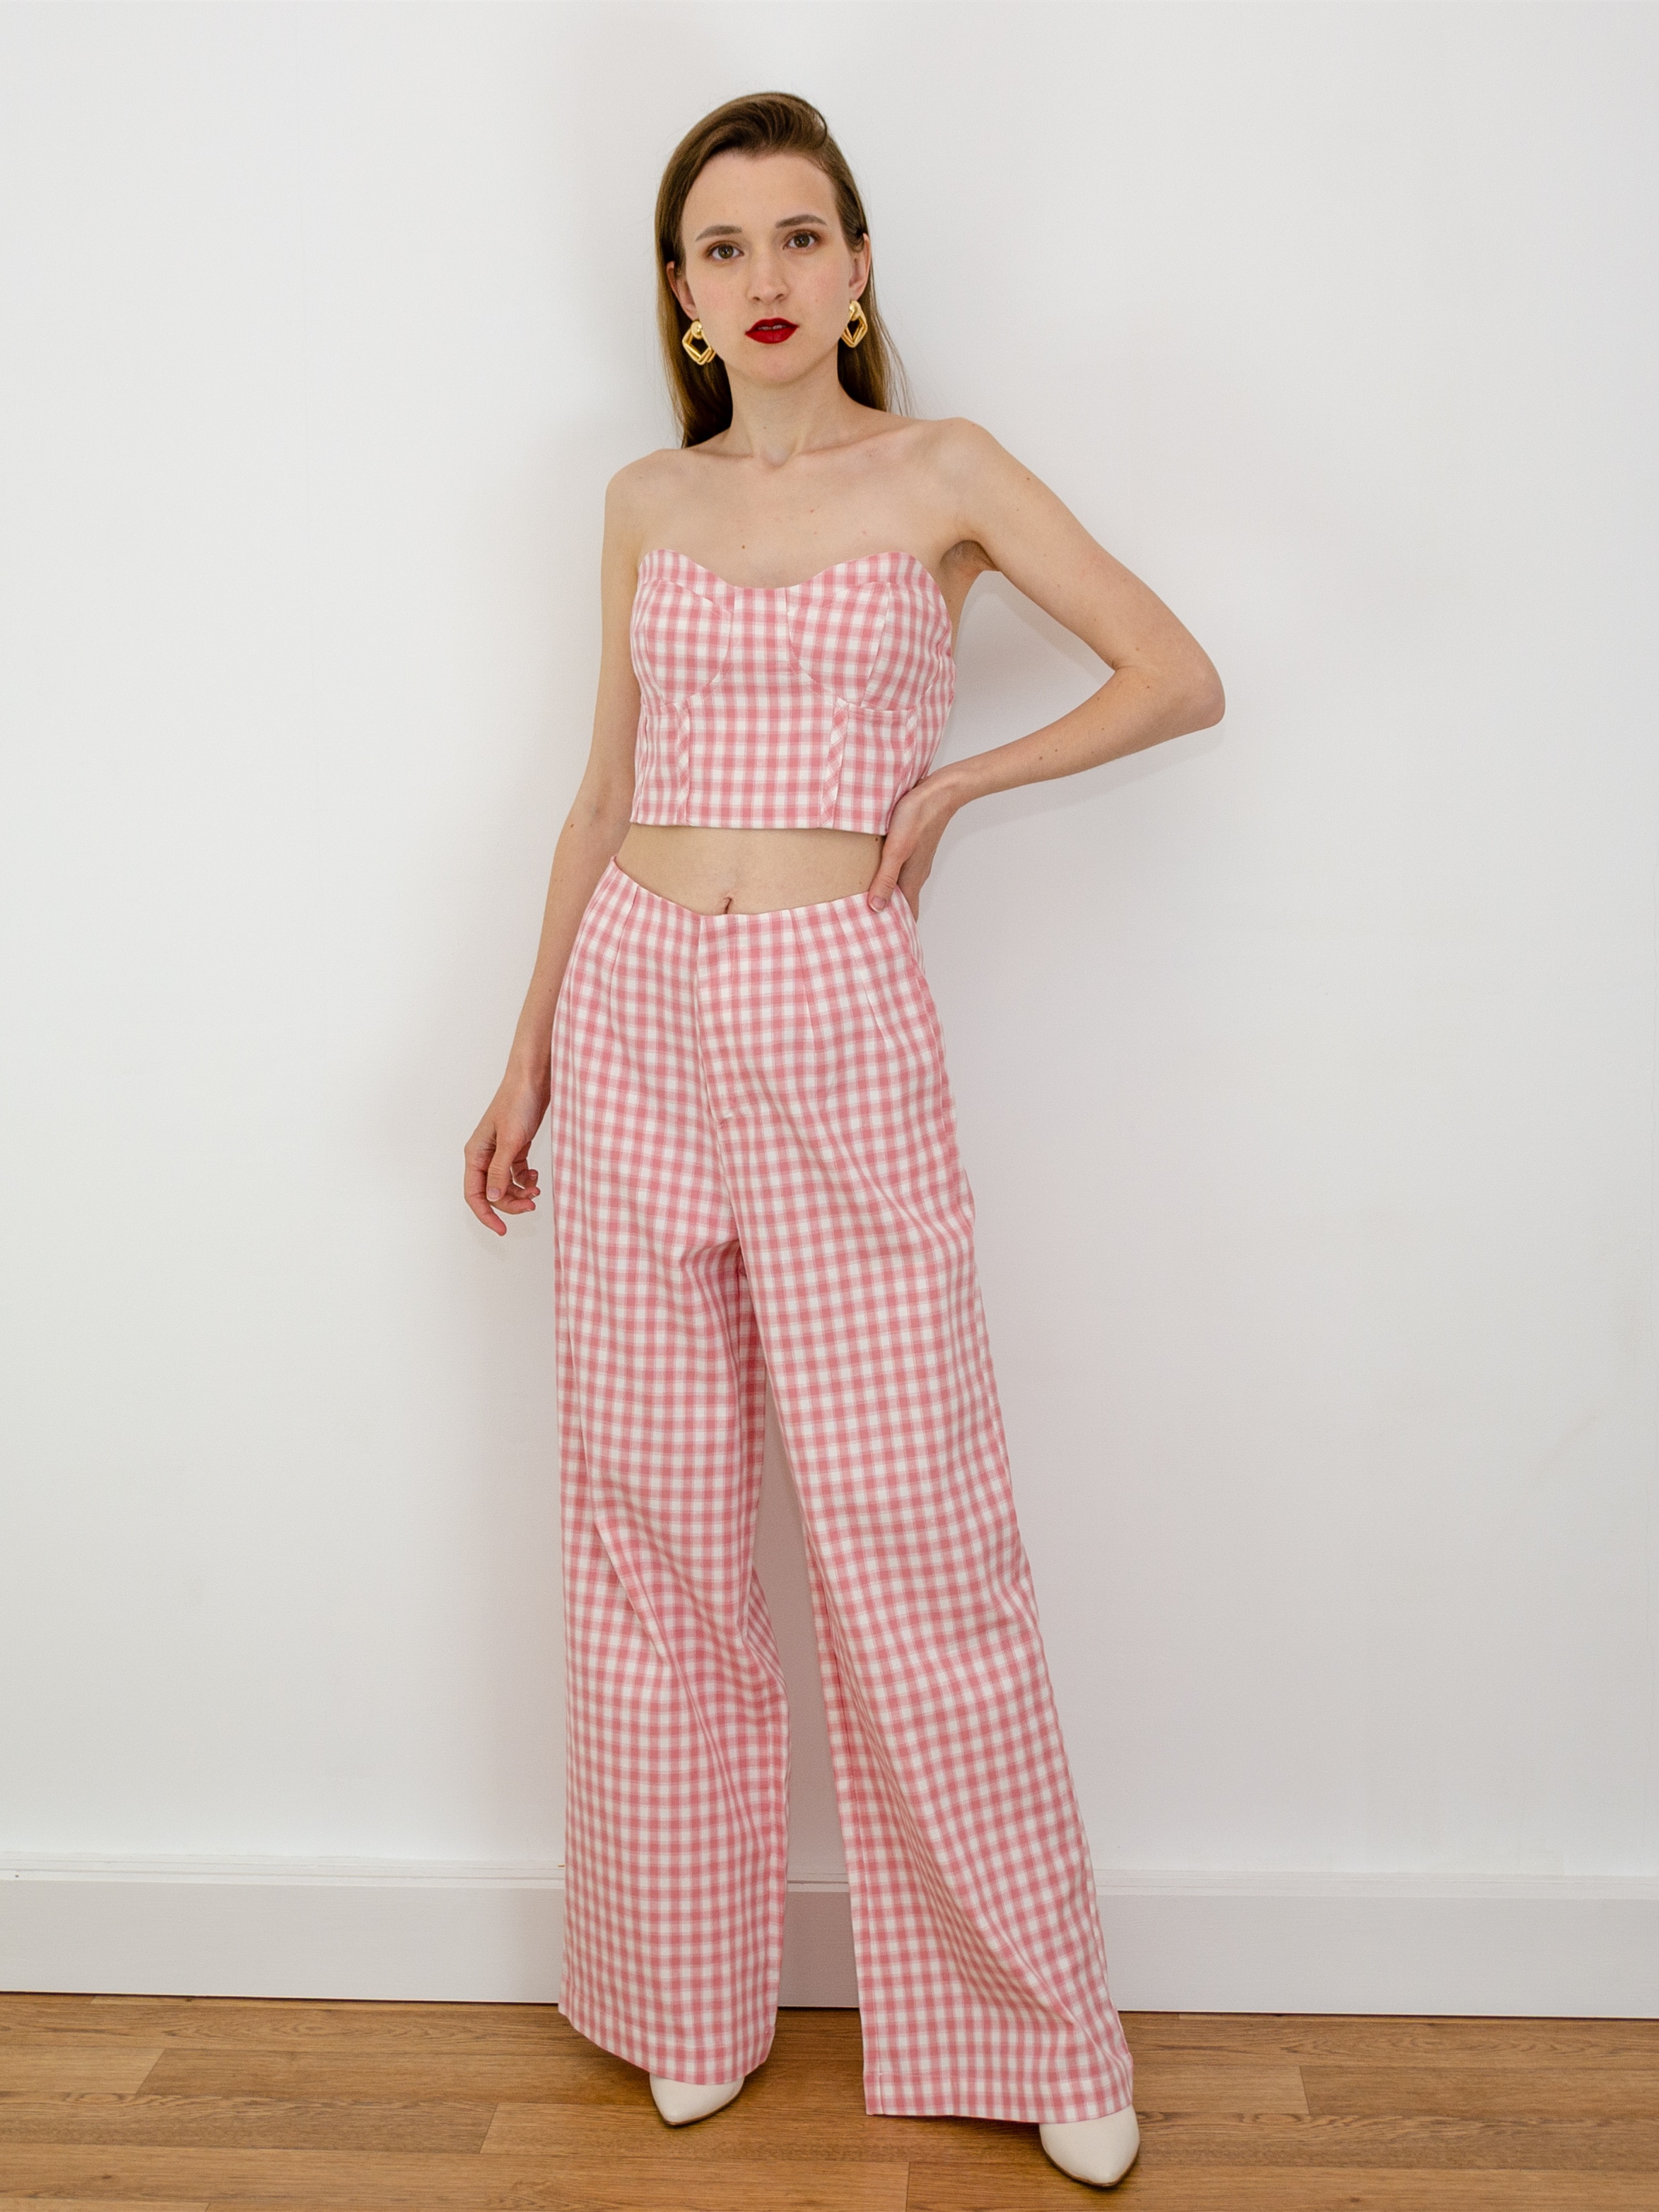 PTYSIC-Women-Fashion-Plaid-Bright-Line-Decoration-Cropped-Corset-Straight-Pants-2022-Summer-Streetwear-Two-Piece-3